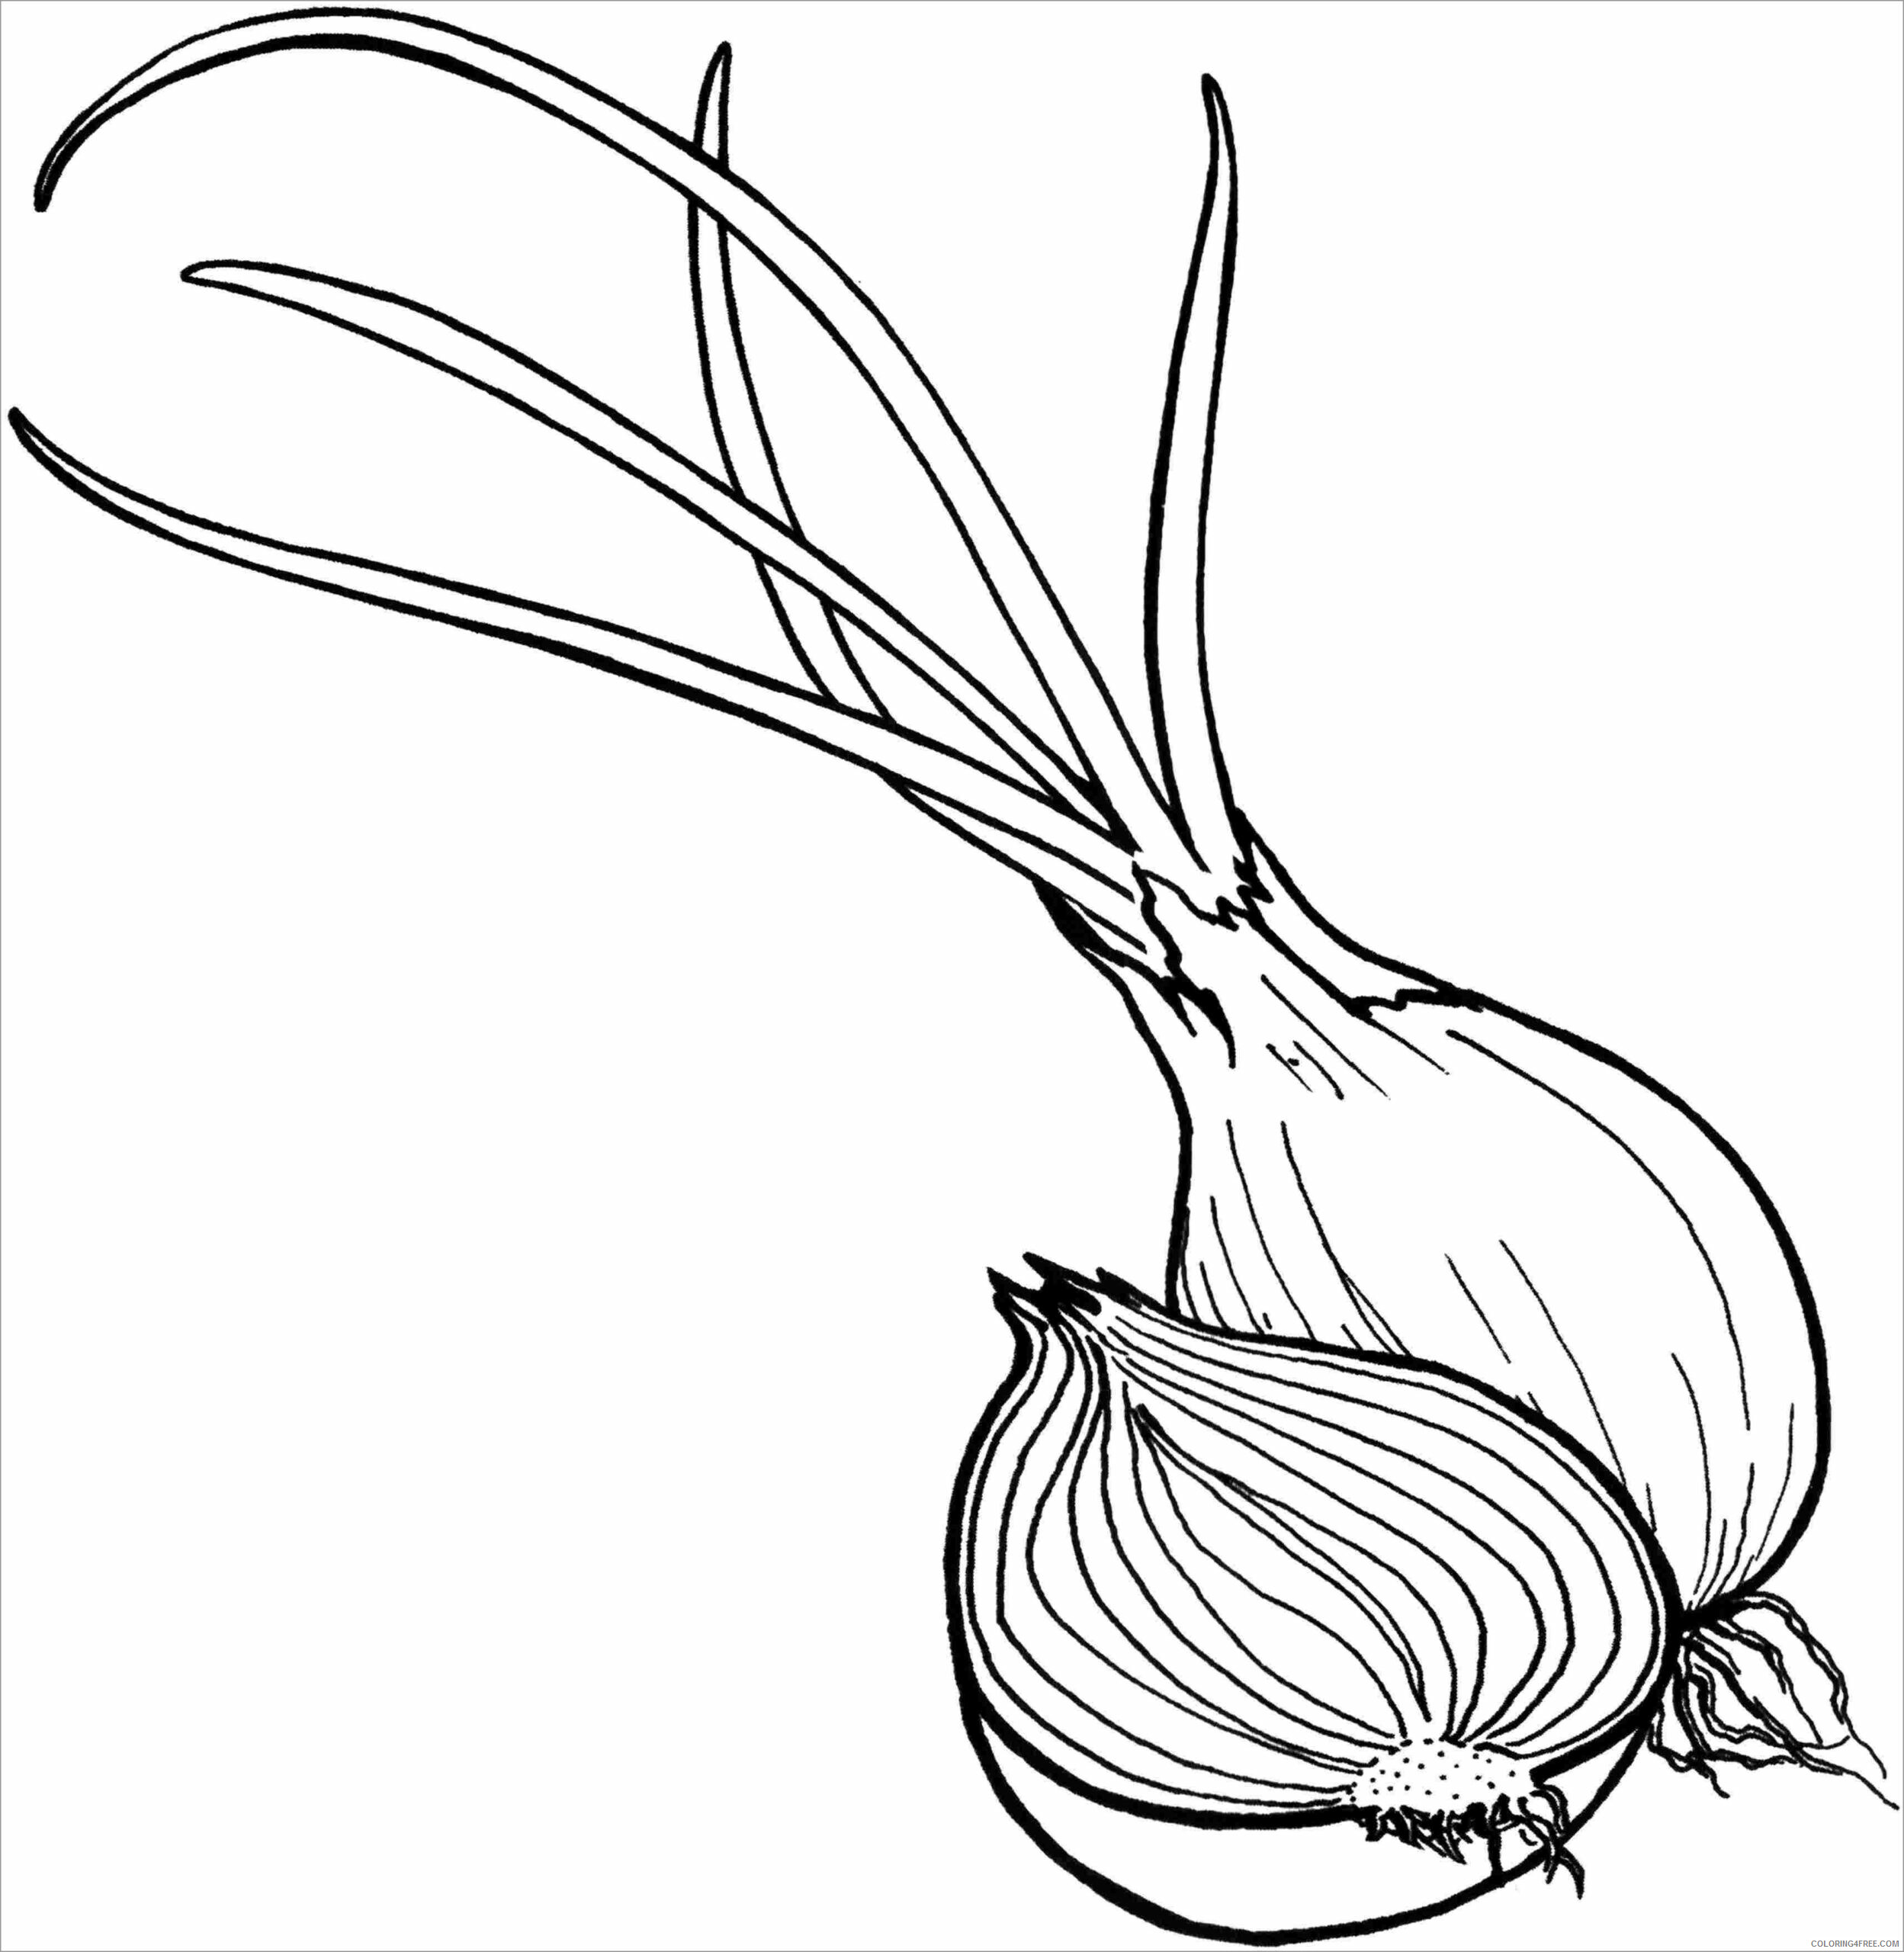 Onion Coloring Pages Vegetables Food sliced onions for kids Printable 2021 615 Coloring4free